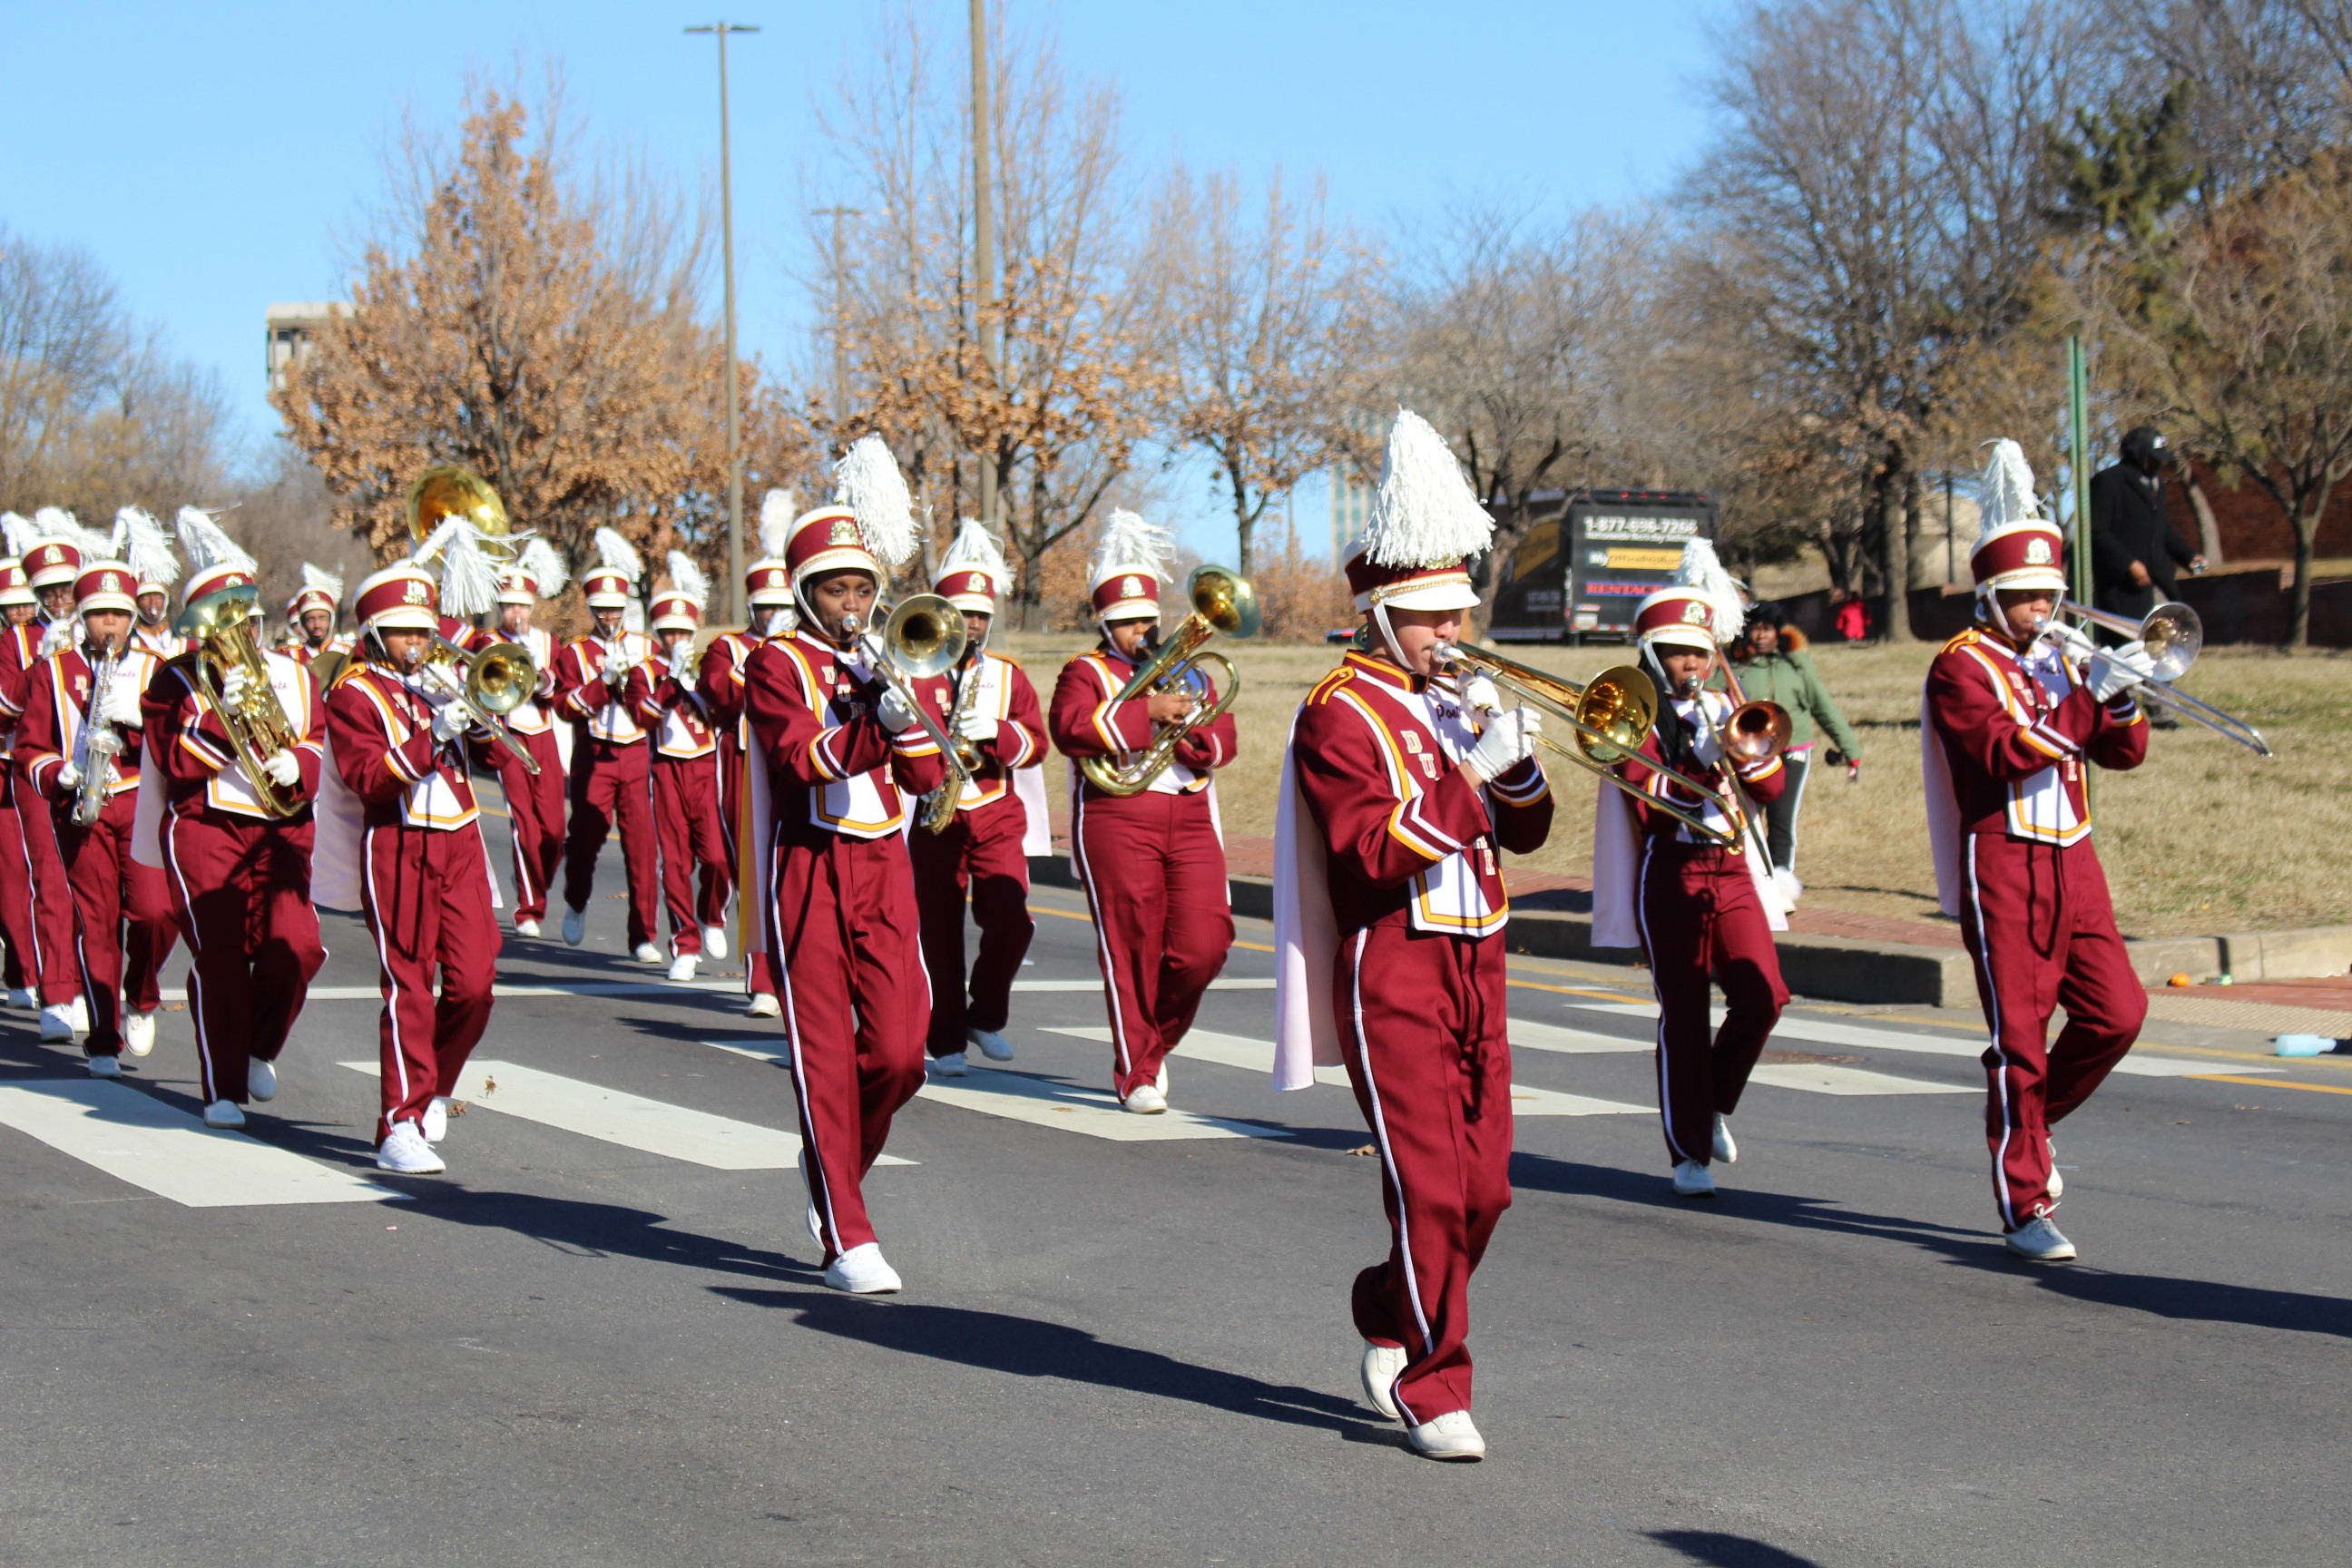 19th Annual Dr. Martin Luther King, Jr. Parade 92 Q